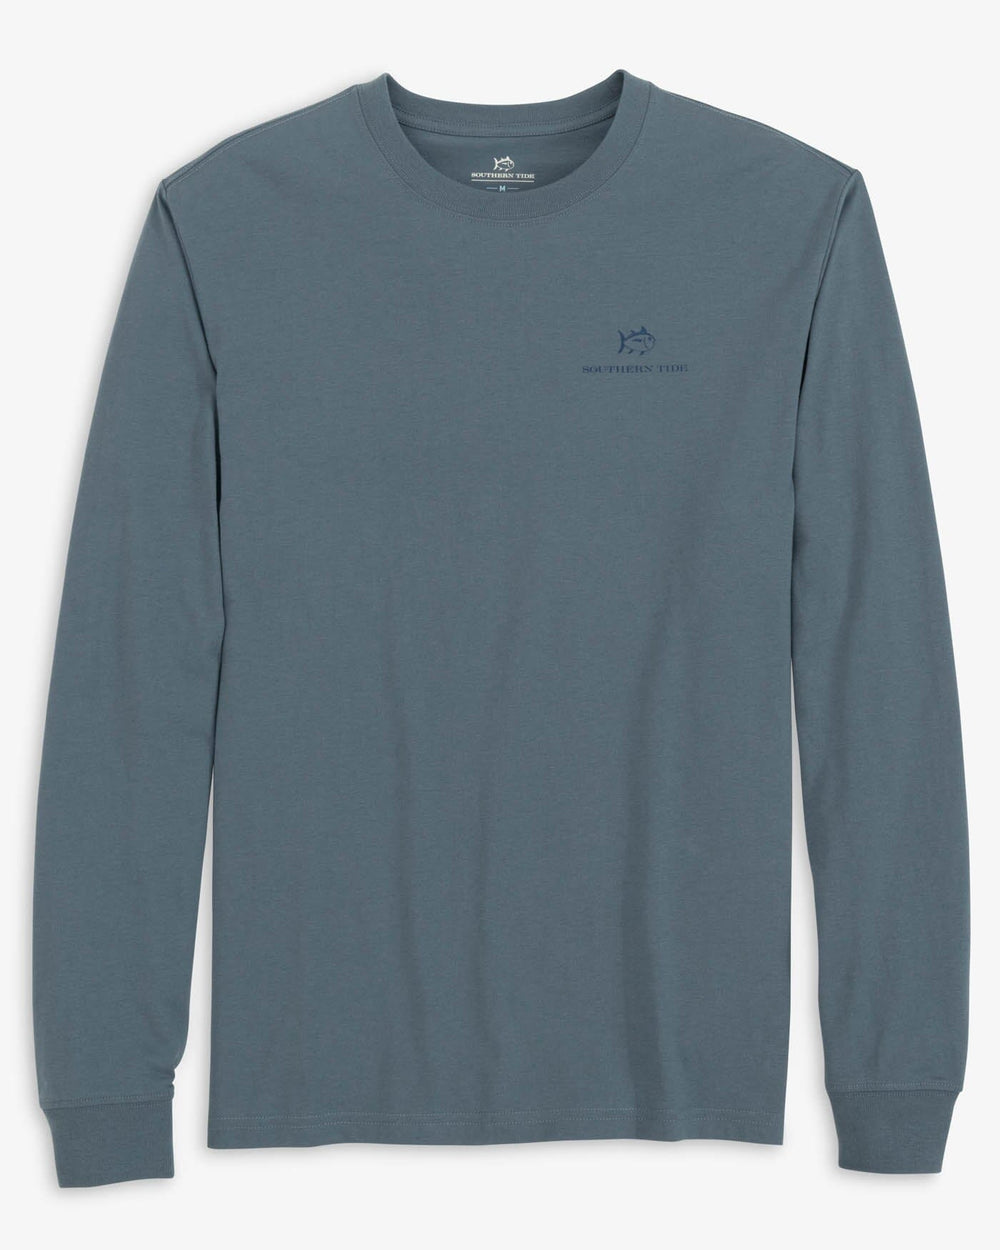 The front view of the Southern Tide On Board For Off Roads T-Shirt by Southern Tide - Blue Haze